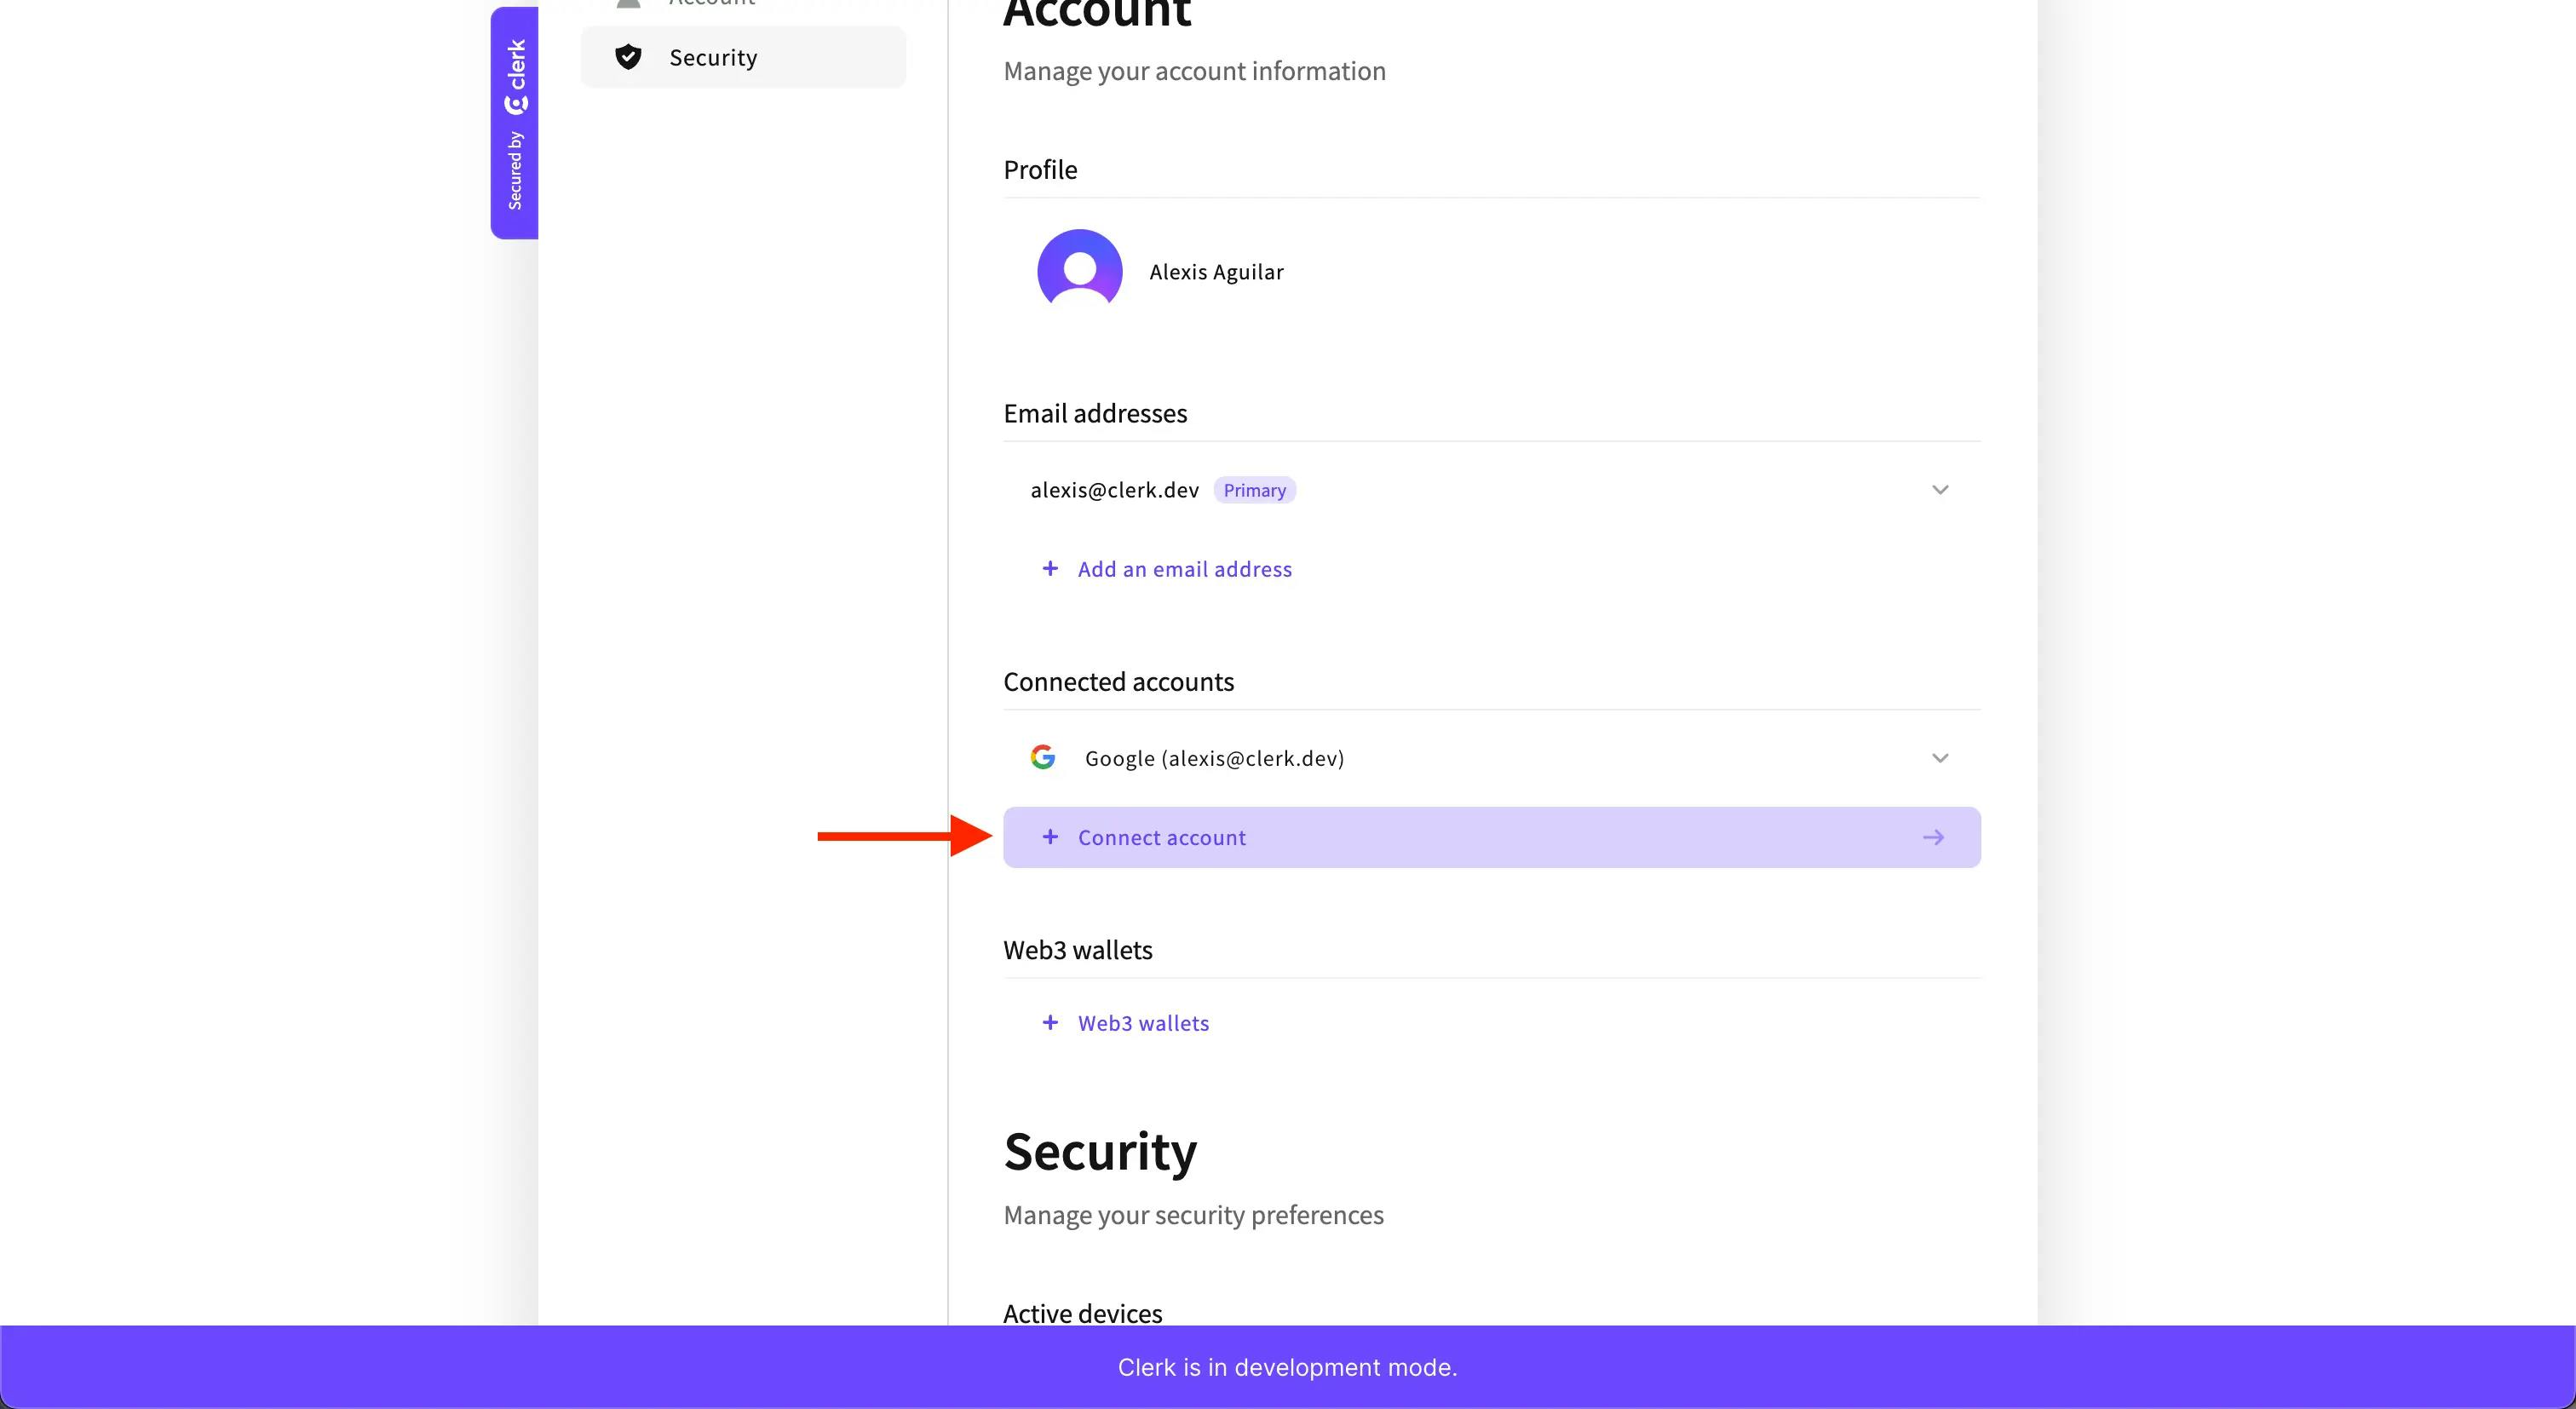 The User Profile page in the Account Portal. There is a red arrow pointing to the 'Connect account' button in the 'Connected accounts' section.